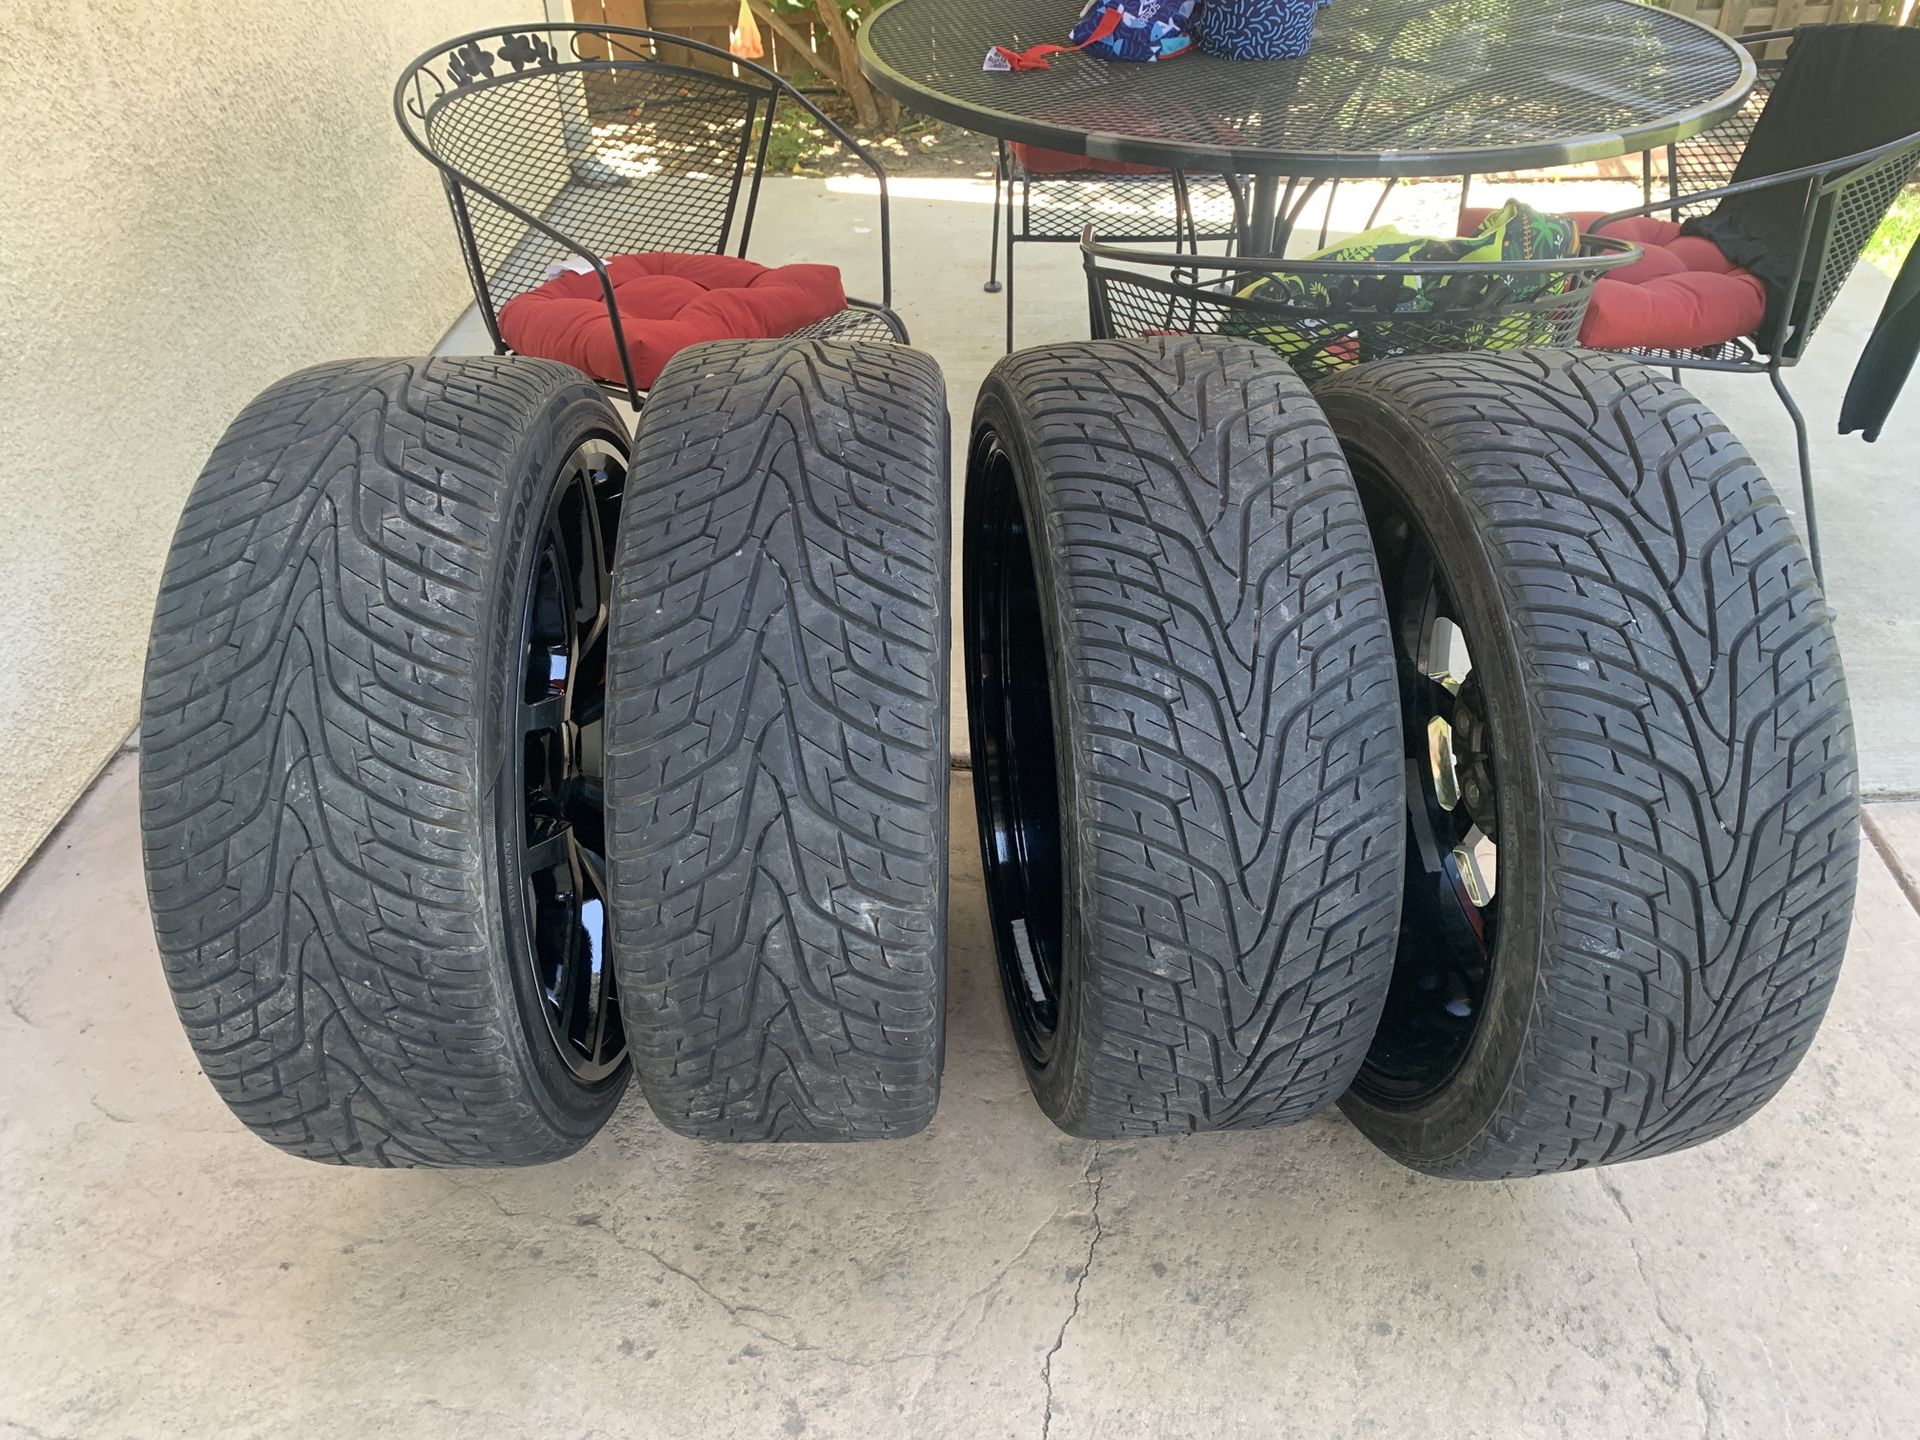 265/35/22 trade for 33x12.50r22 MT tires